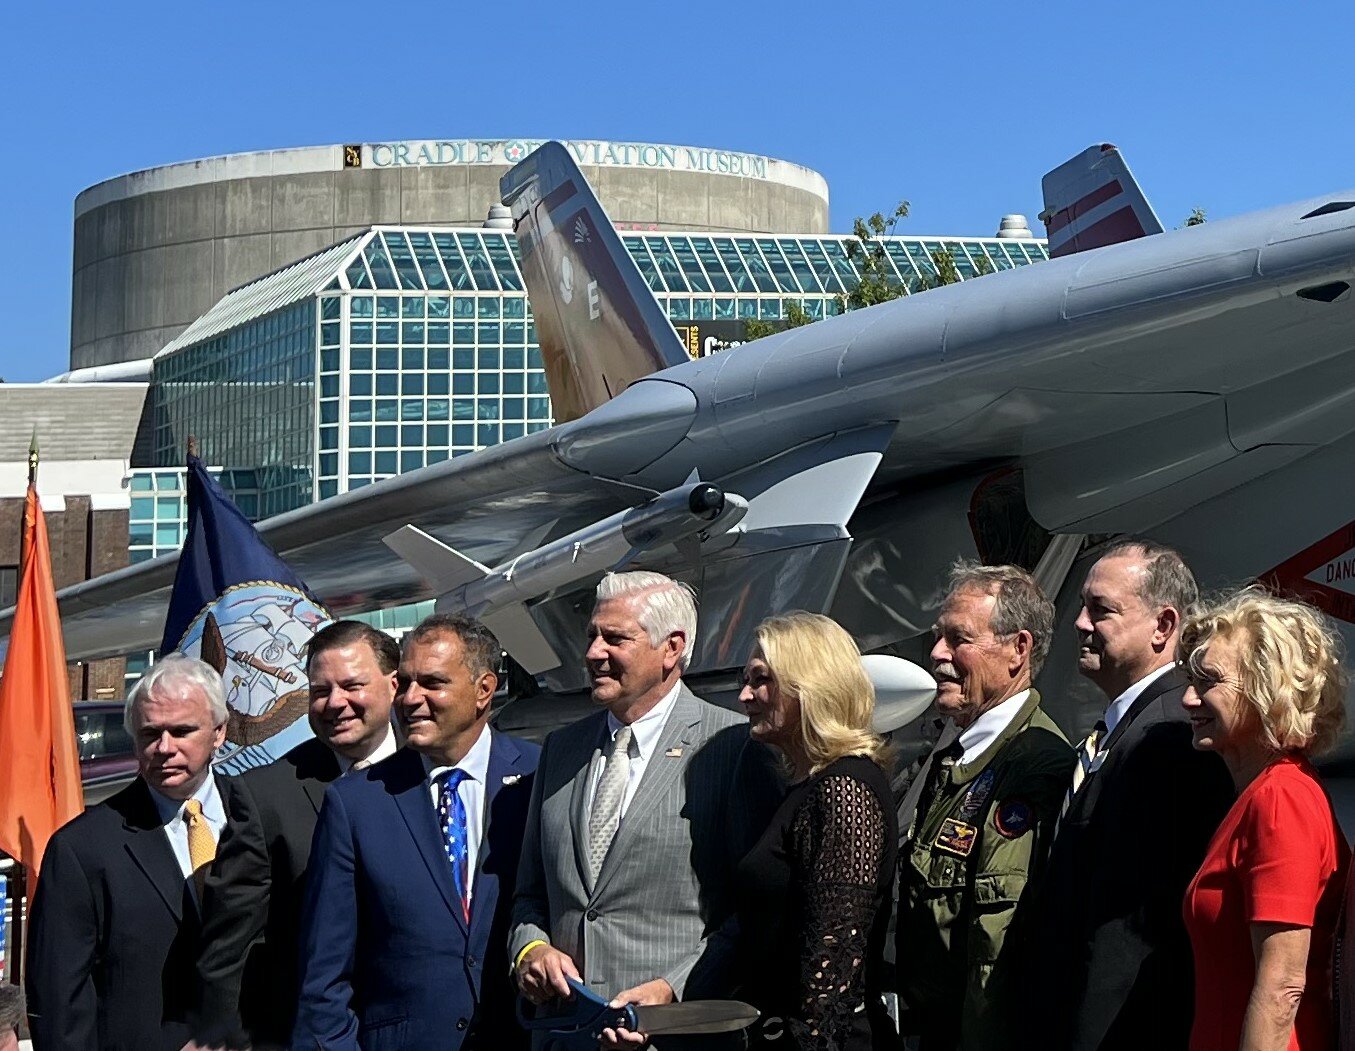 Among the officials present at the ribbon cutting were, from left, Cradle of Aviation Museum President Andy Parton, Nassau County Legislator Tom McKevitt, Town of Oyster Bay Supervisor Joseph Saladino, County Executive Bruce Blakeman, Cynthia Snodgrass, U.S. Air Force Capt. Robert “Hoot” Gibson, Vic Beck of Northrop Grumman, and County Comptroller Elaine Phillips.